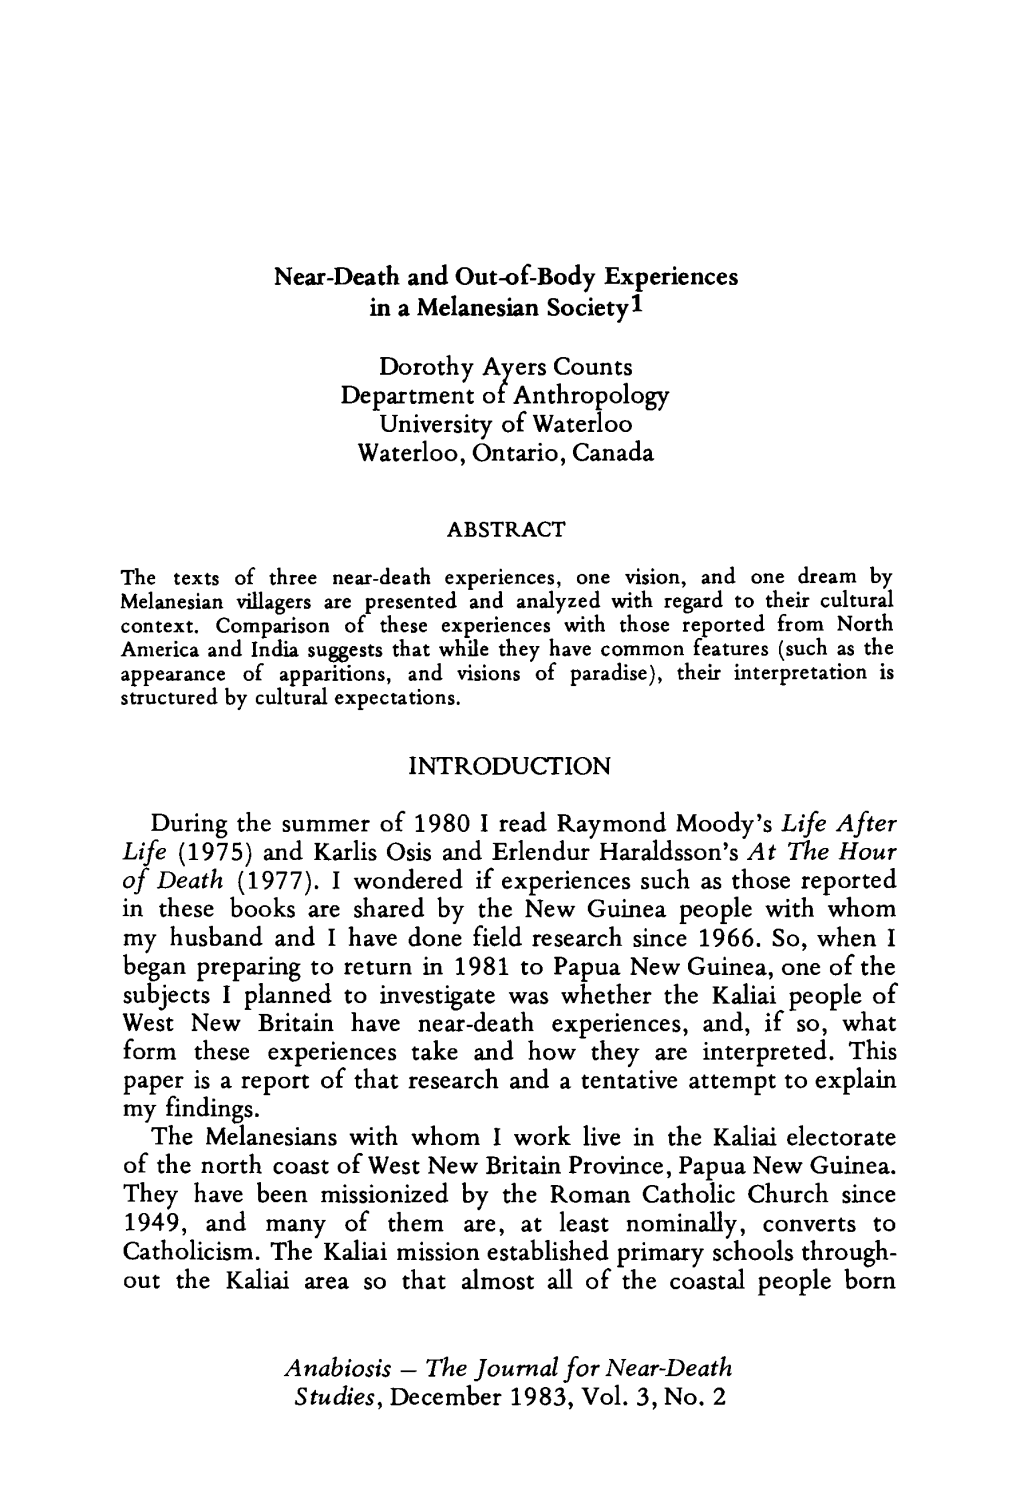 Near-Death and Out-Of-Body Experiences in a Melanesian Societyi